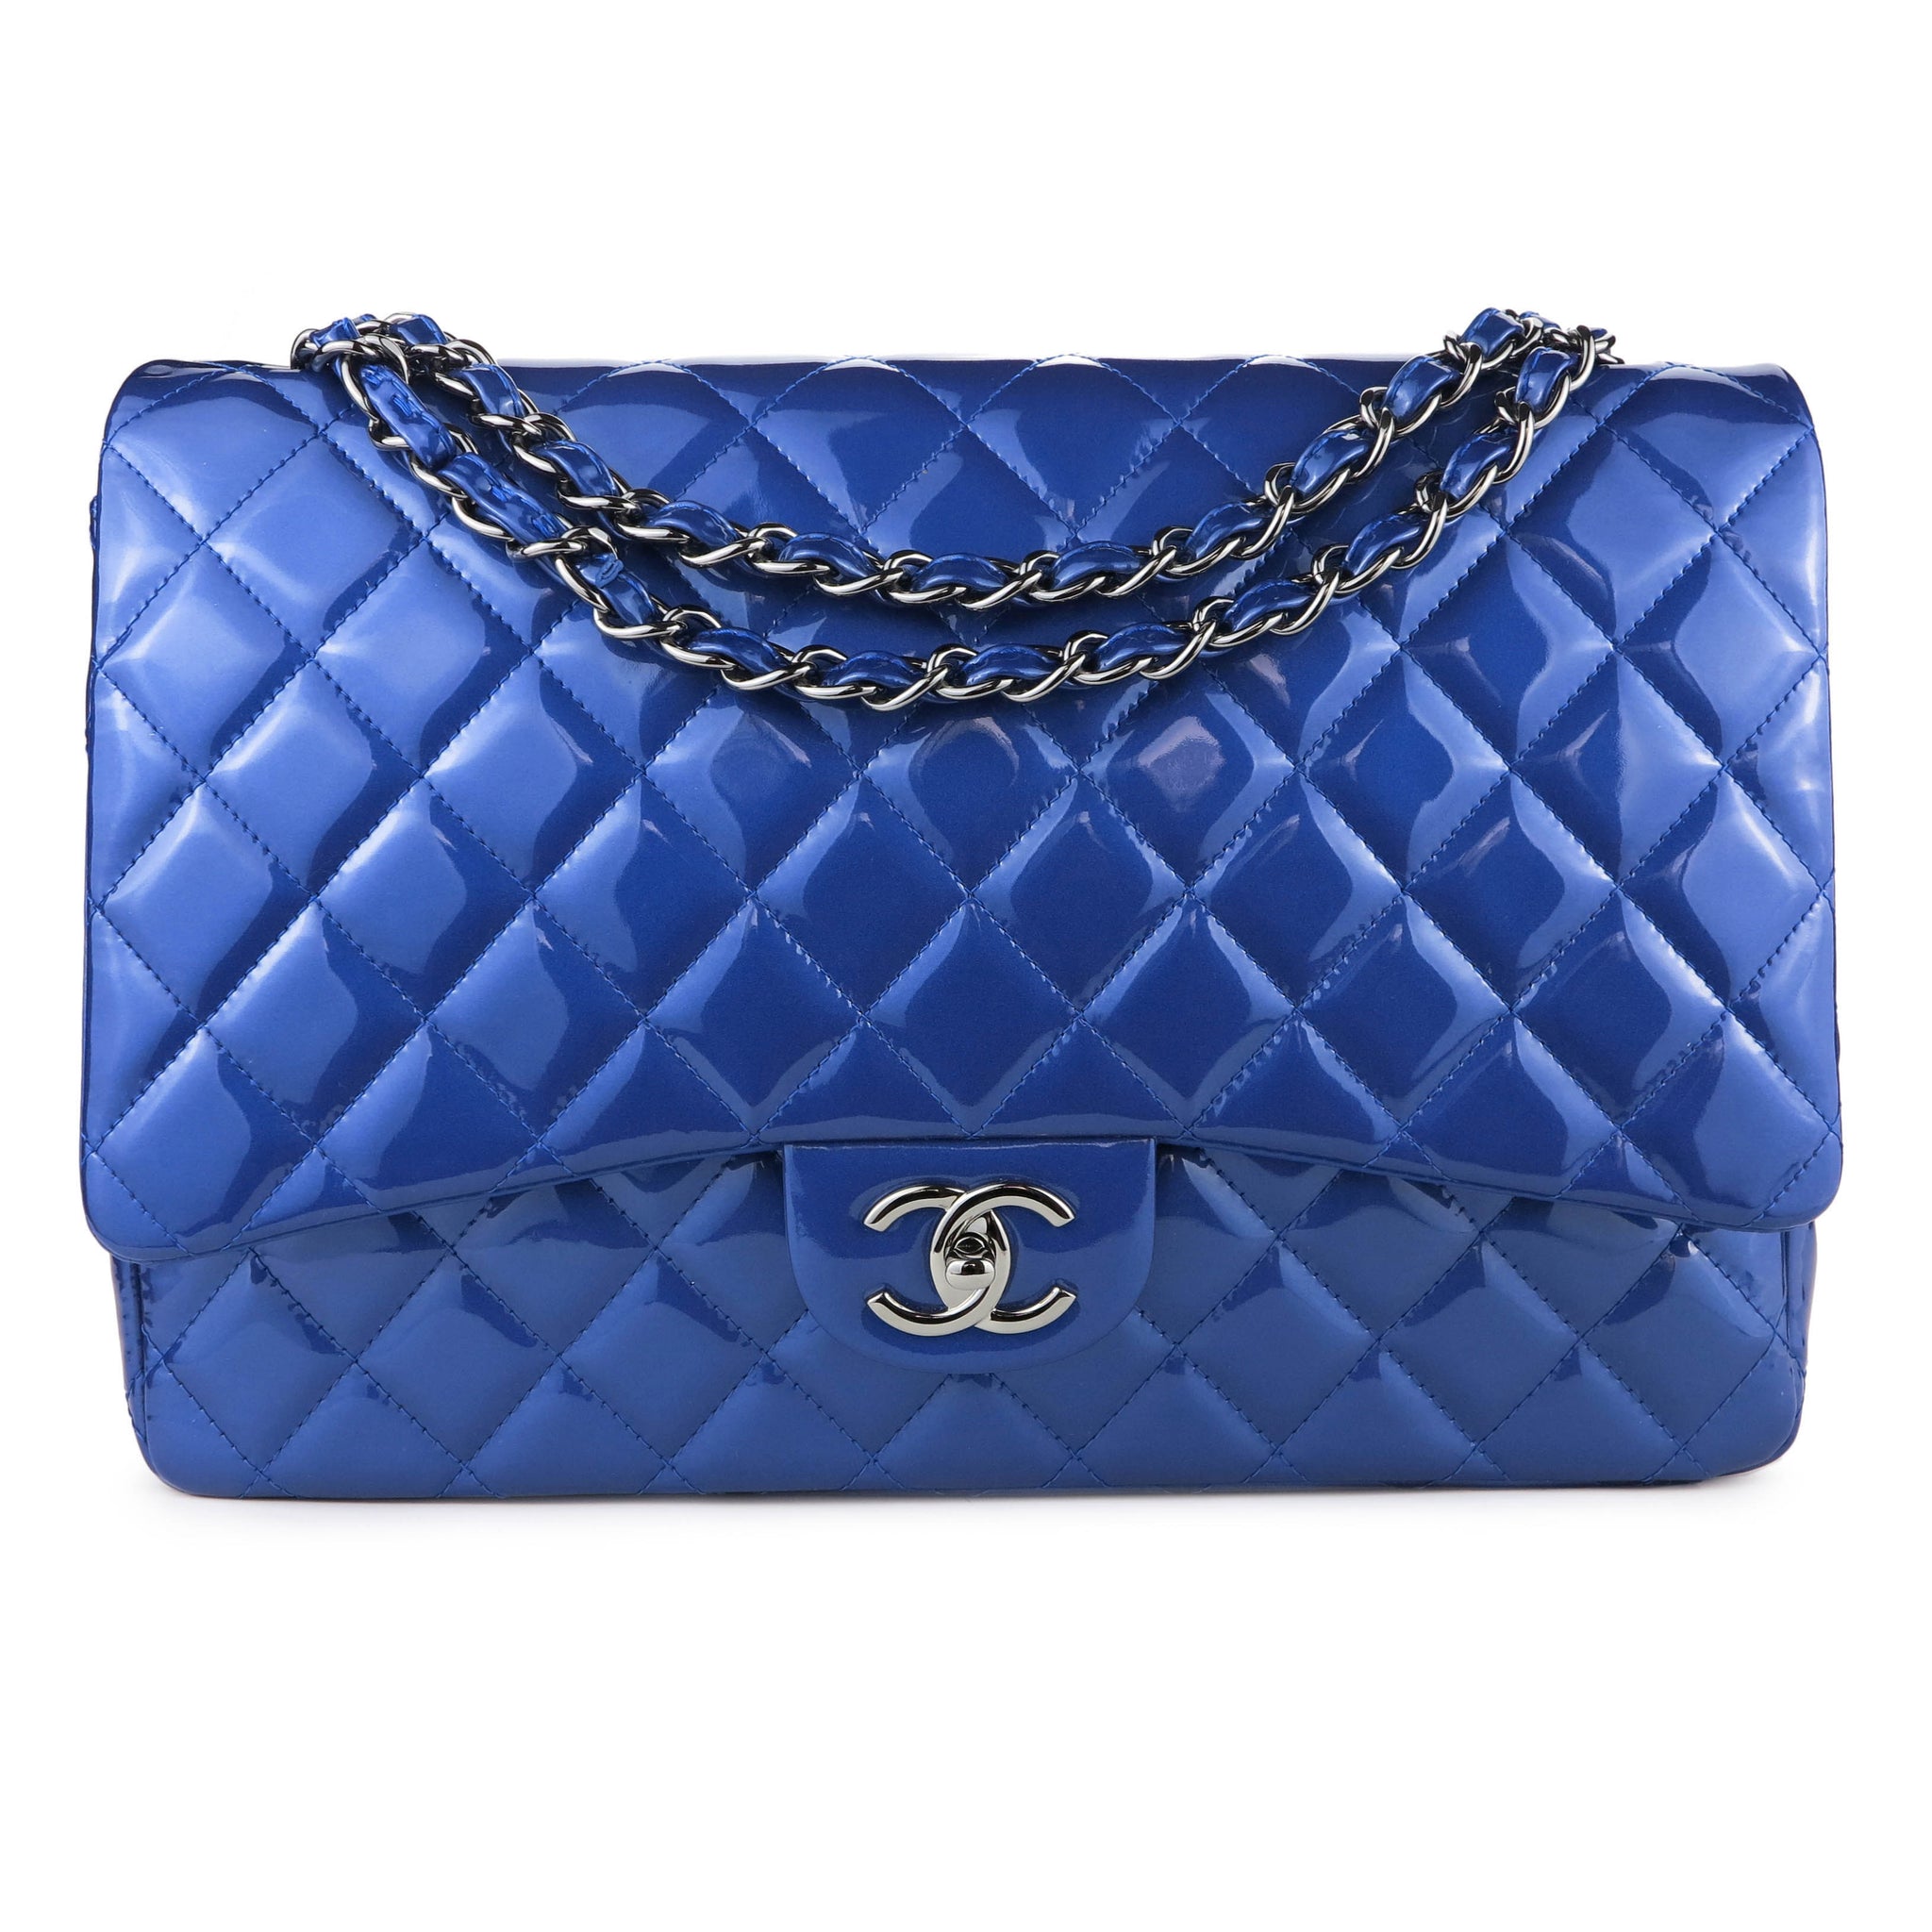 CHANEL Maxi Jumbo Double Flap in Blue Patent Leather | Dearluxe